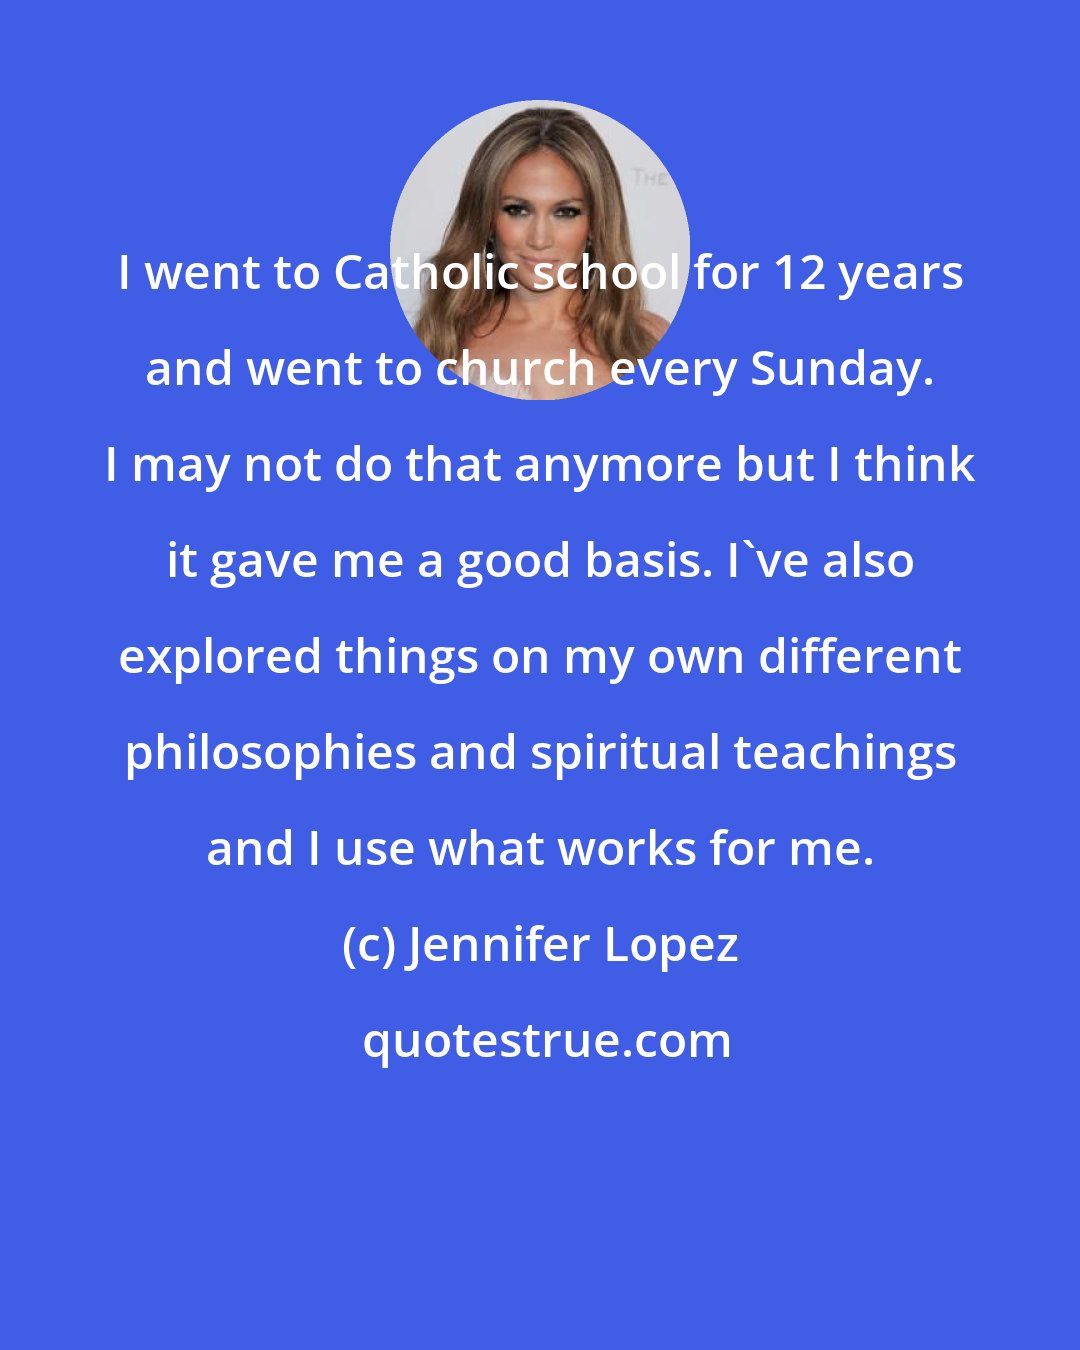 Jennifer Lopez: I went to Catholic school for 12 years and went to church every Sunday. I may not do that anymore but I think it gave me a good basis. I've also explored things on my own different philosophies and spiritual teachings and I use what works for me.